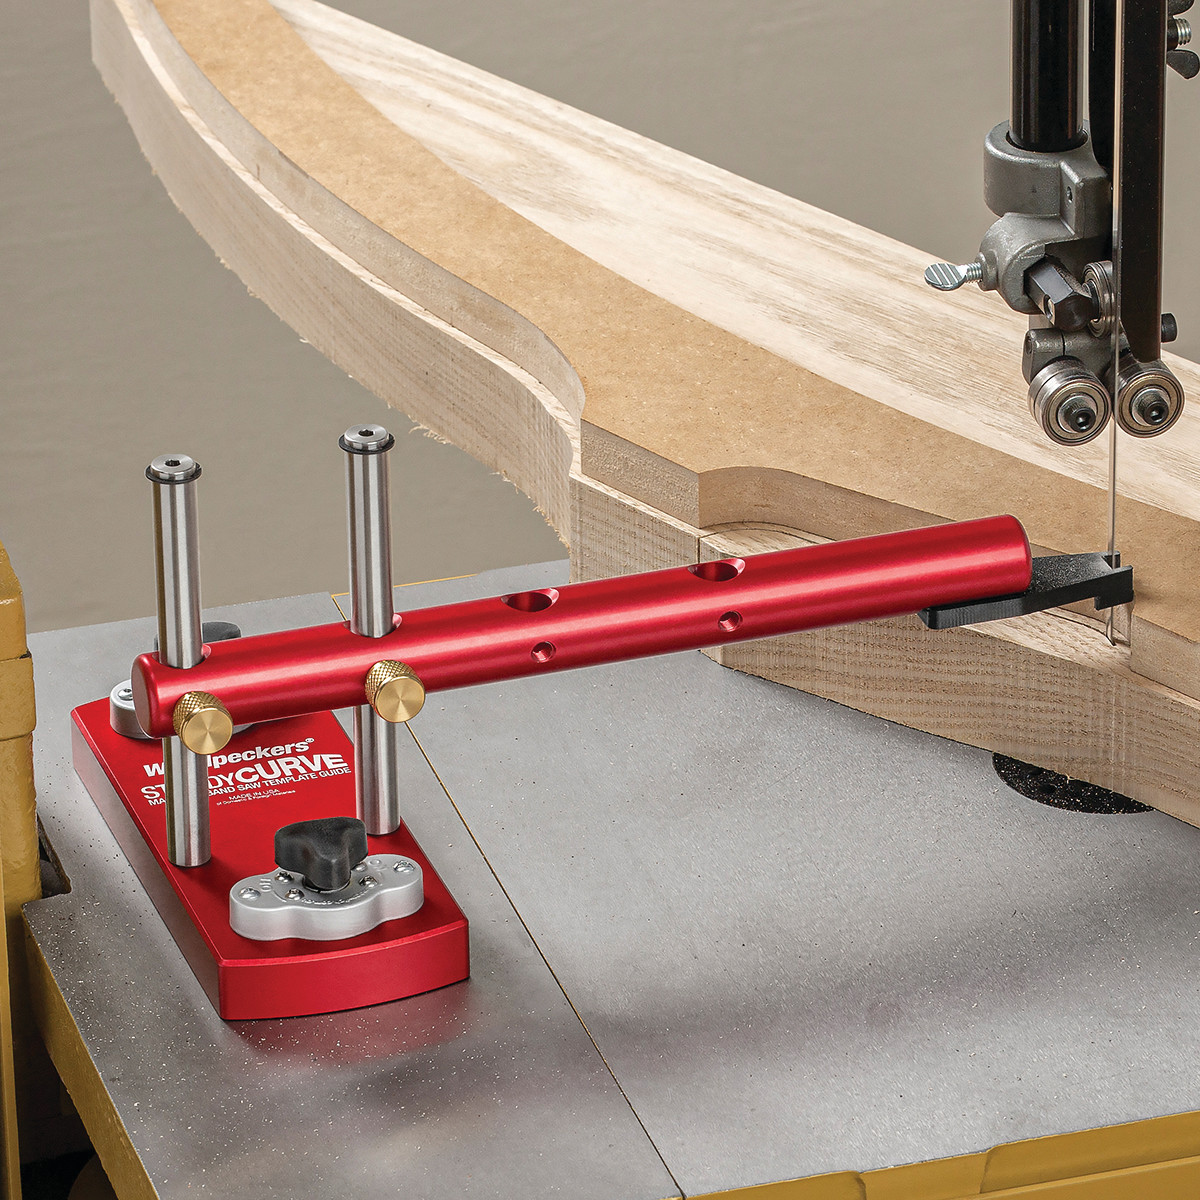 Woodpeckers SteadyCurve Band Saw Template Guide